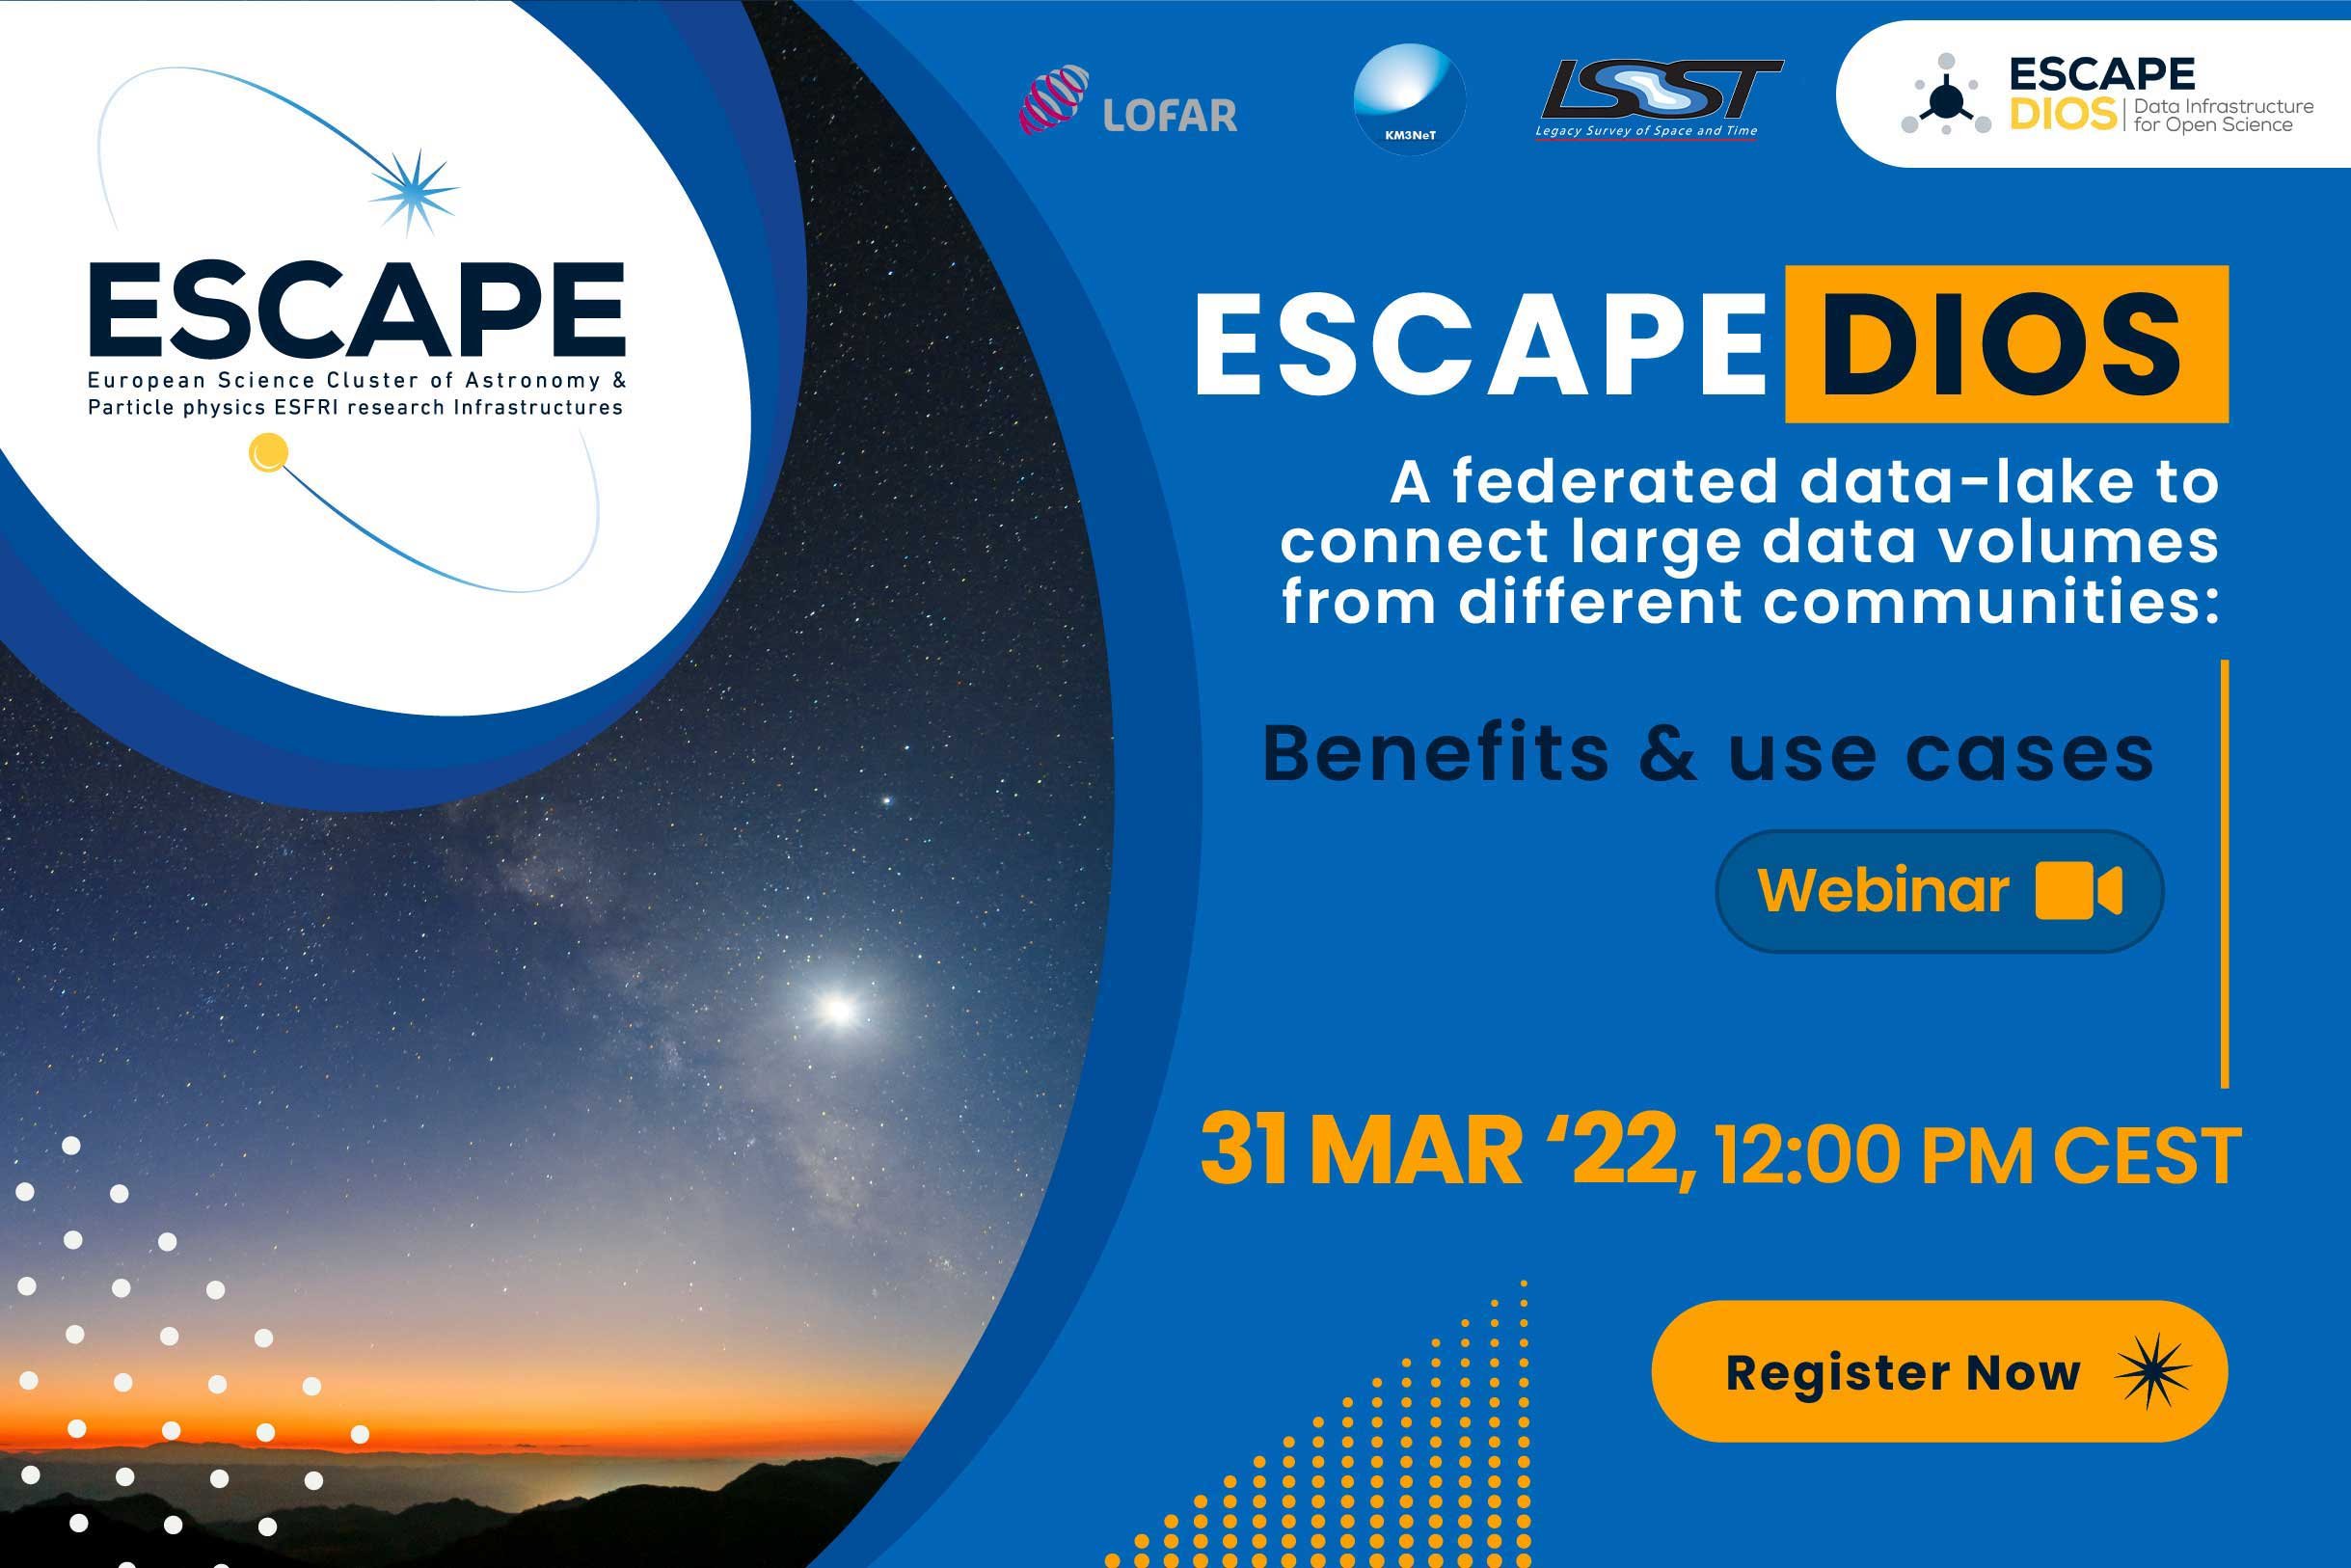 Webinar: ESCAPE DIOS | A federated data-lake to connect large data volumes from different communities - benefits & use cases